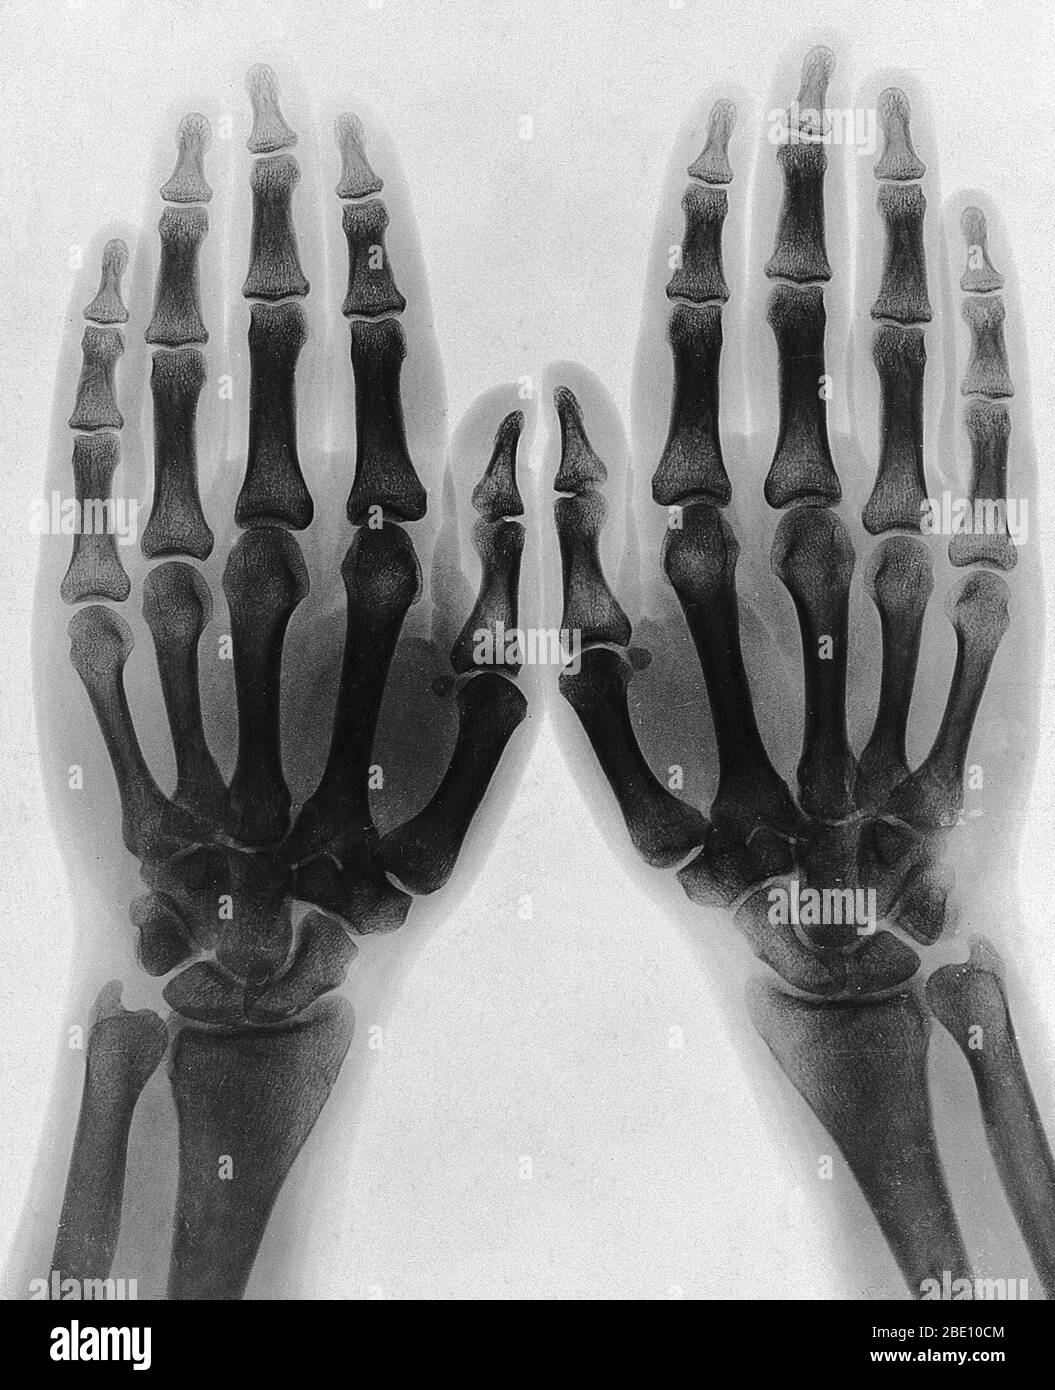 Two hands, viewed by x-ray. Photoprint from radiograph, after Sir Arthur Schuster, 1896. German physicist Wilhelm Rontgen is usually credited as the discoverer of x-rays in 1895, because he was the first to systematically study them, though he is not the first to have observed their effects. He is also the one who gave them the name 'x-rays' (signifying an unknown quantity) though many others referred to these as 'Rontgen rays' (and the associated x-ray radiograms as, 'Rontgenograms' for several decades after their discovery. Stock Photo